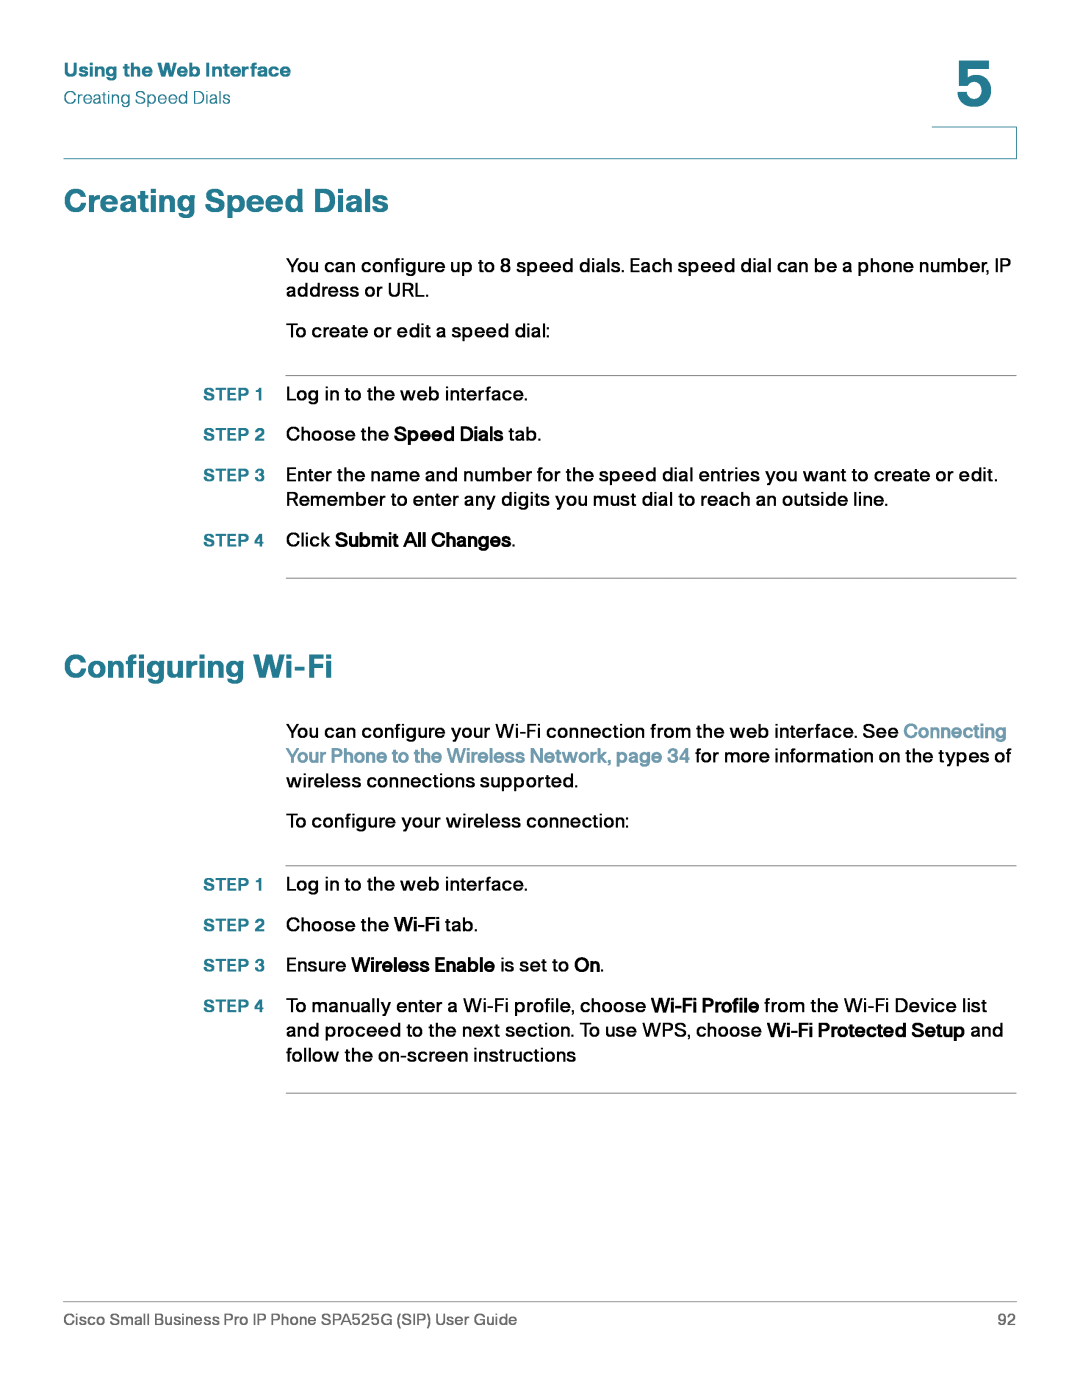 Cisco Systems SPA525G manual Creating Speed Dials, Configuring Wi-Fi, Using the Web Interface, Click Submit All Changes 